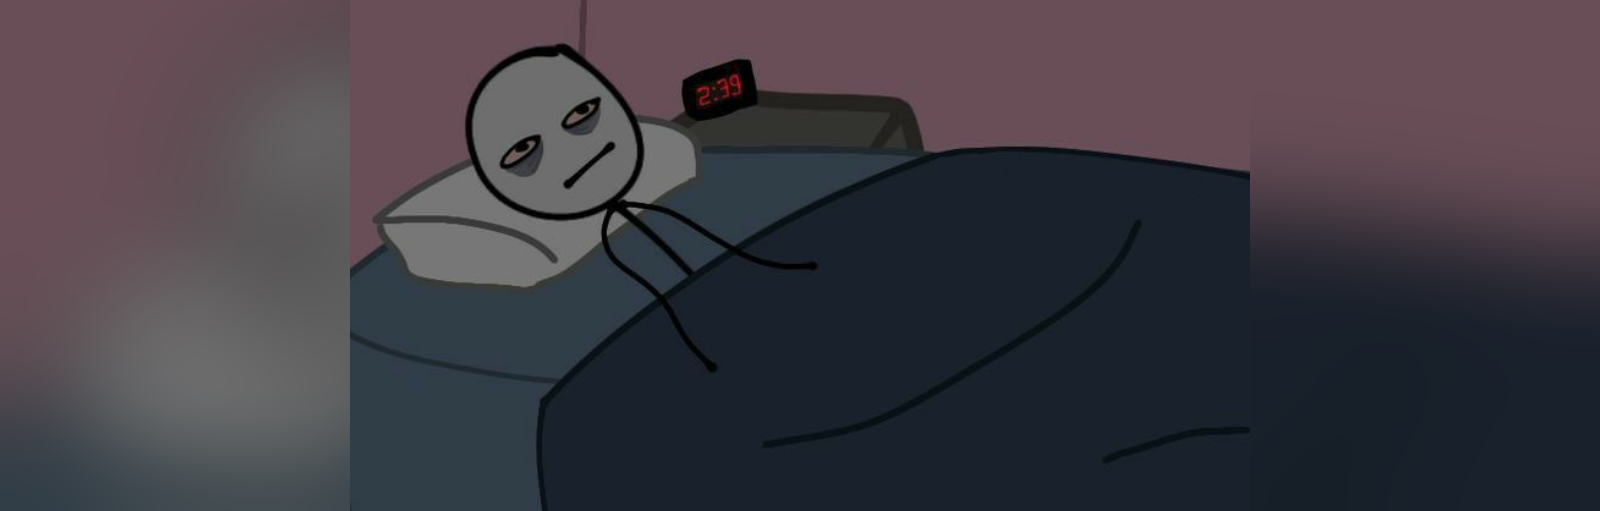 High Quality Stickman in bed thinking Blank Meme Template